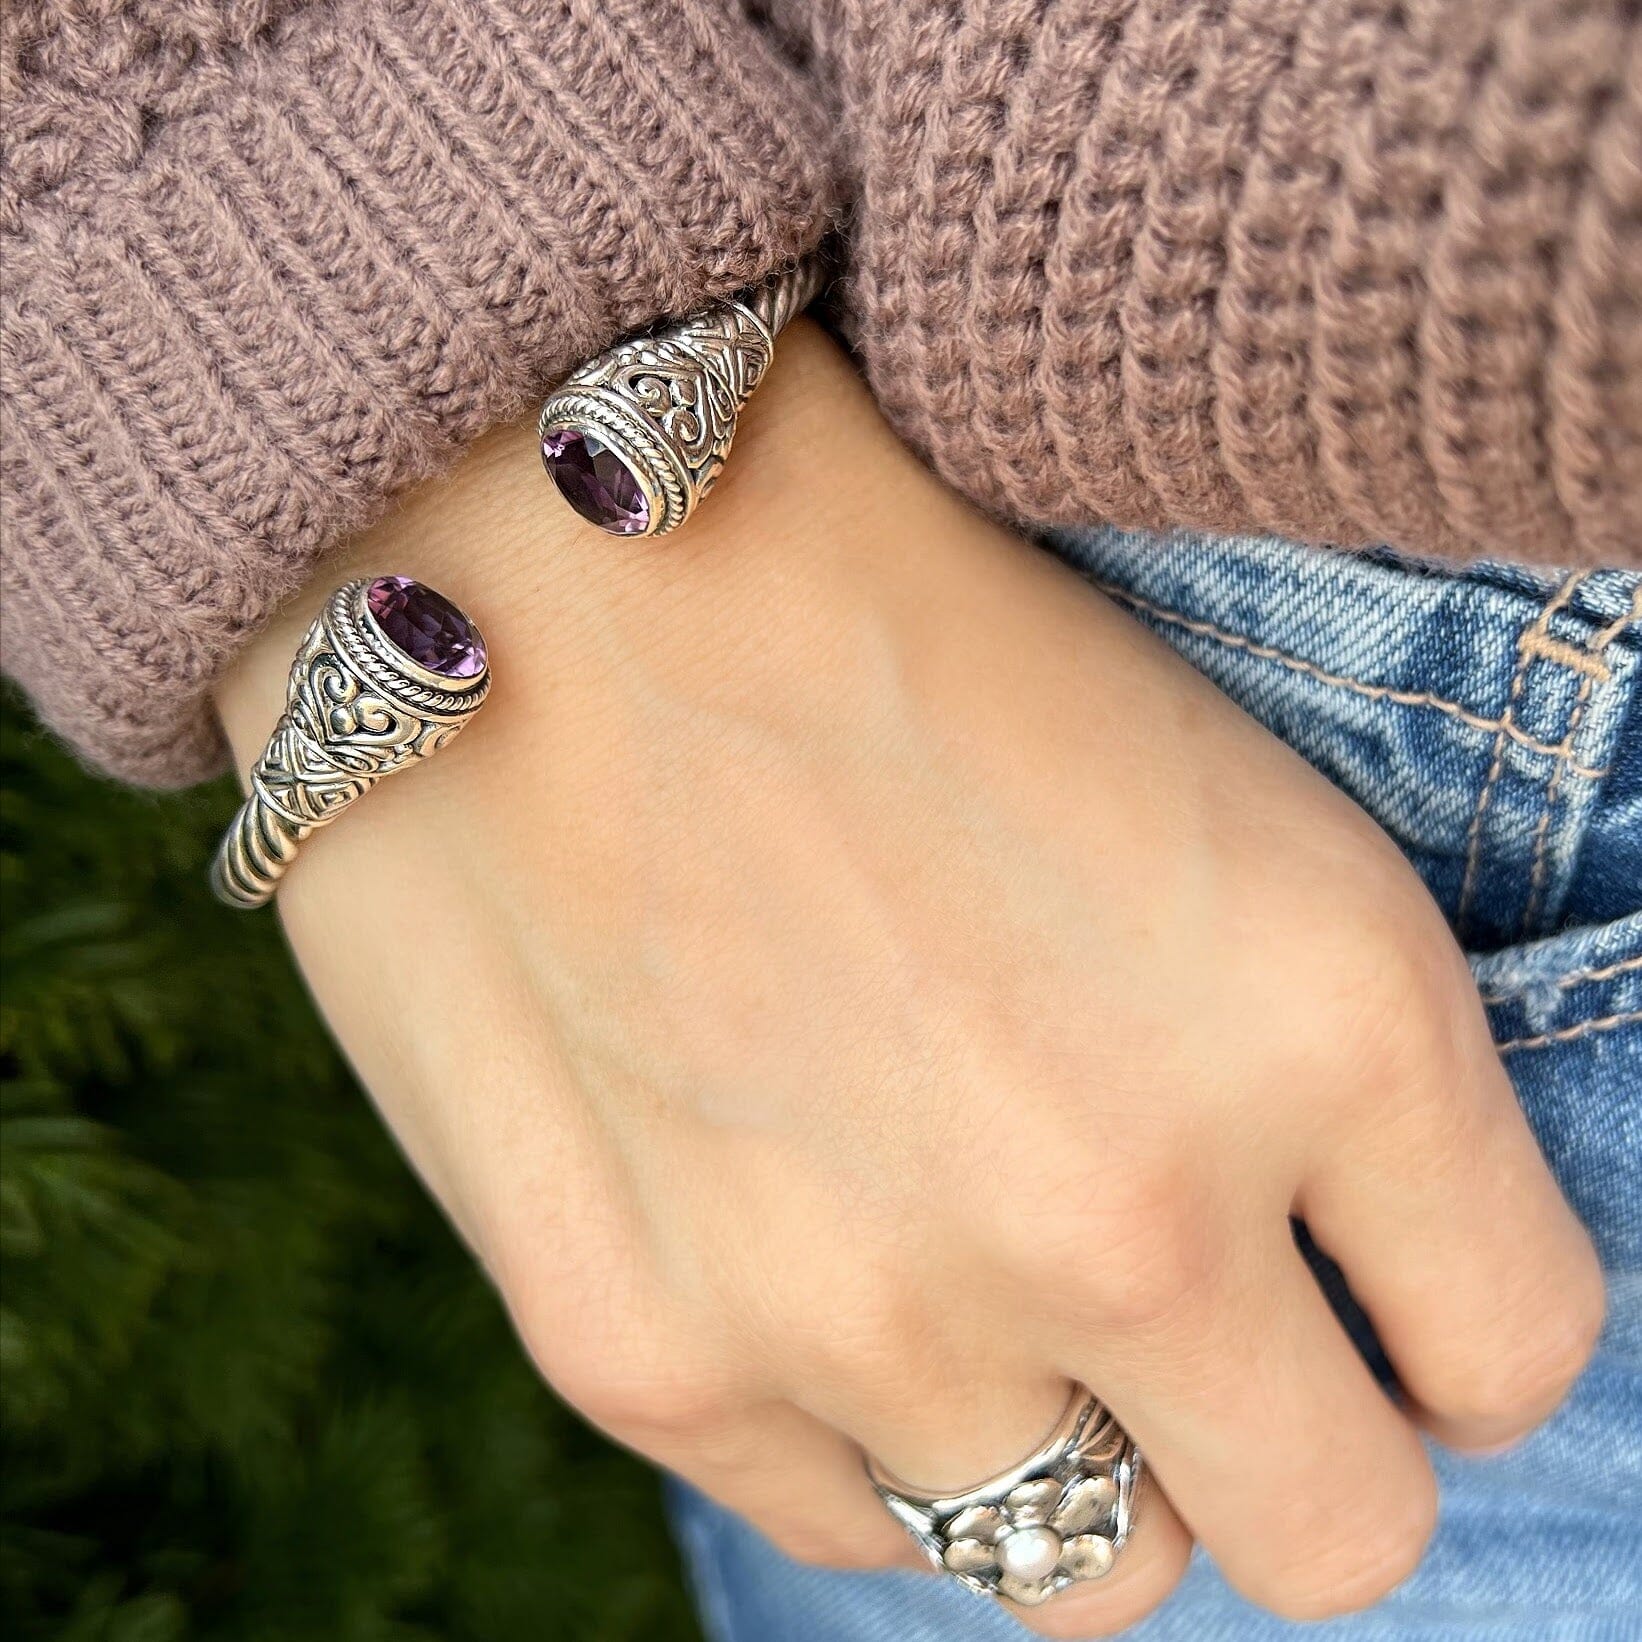 twisted hinge cuff featuring filigree and amethyst